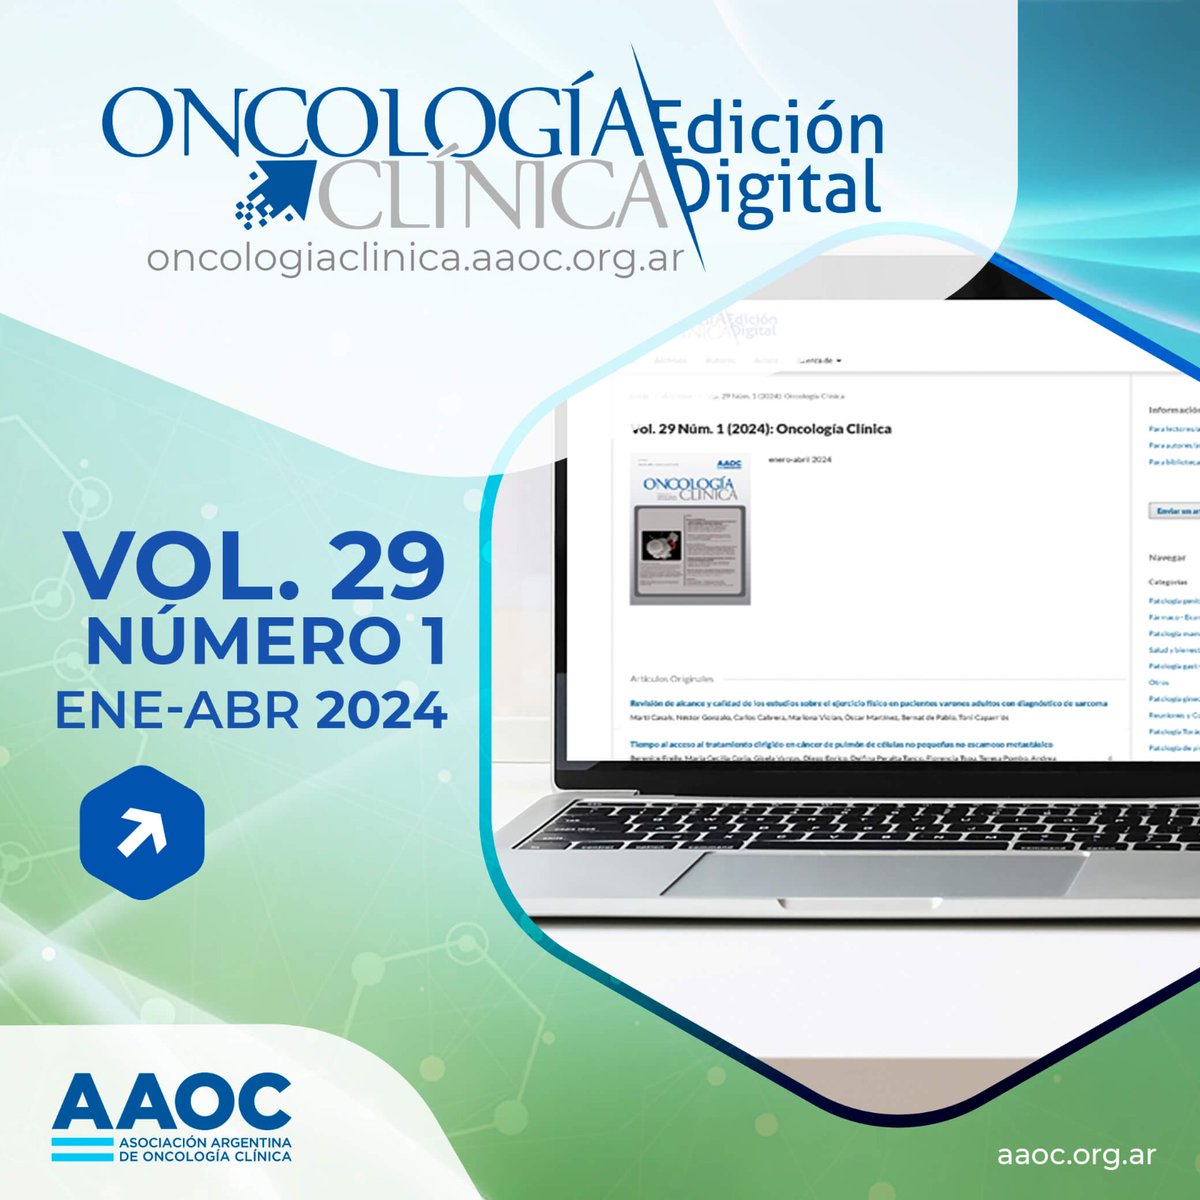 Link de acceso: oncologiaclinica.aaoc.org.ar/index.php/onco…